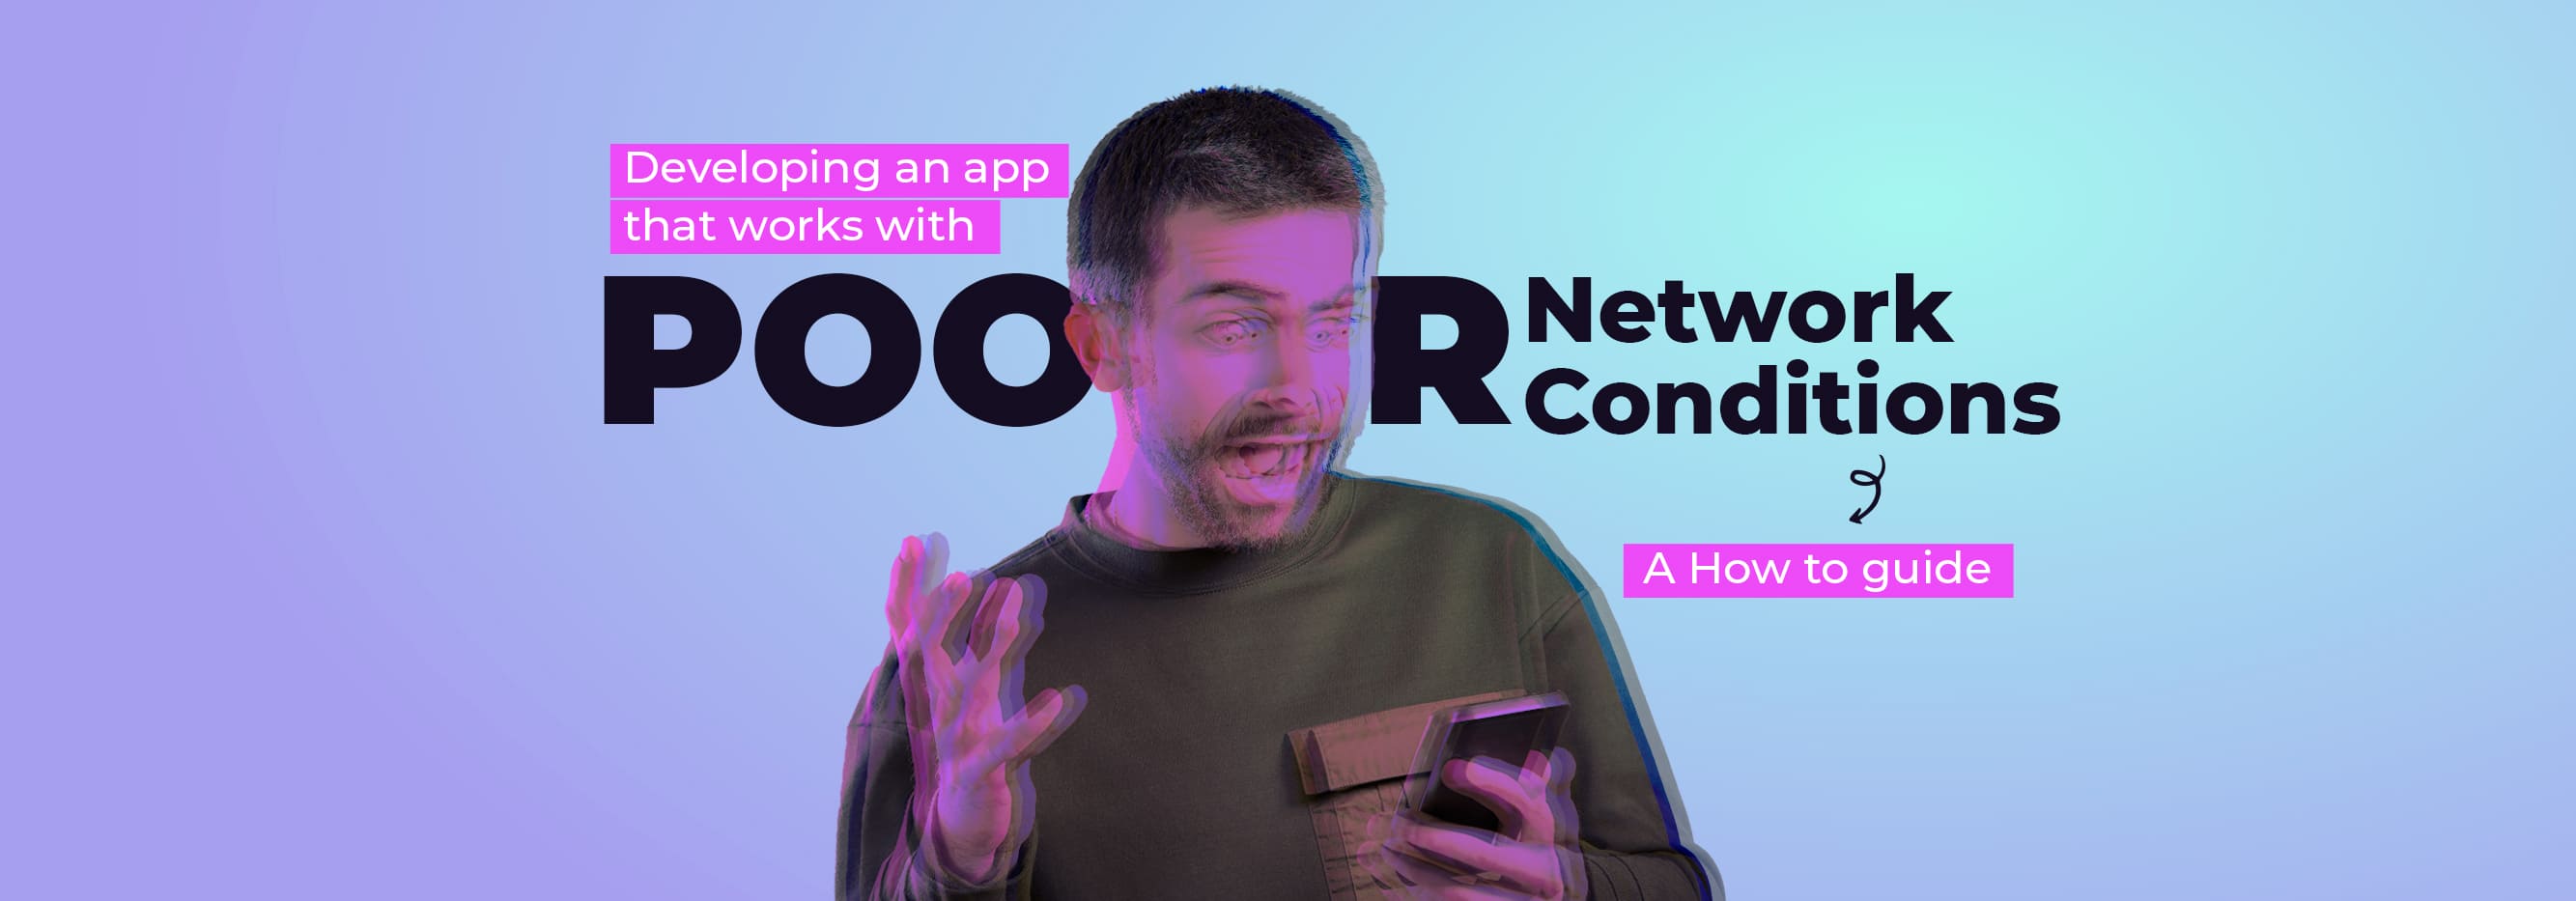 Developing an App that Works with Poor Network Conditions_banner